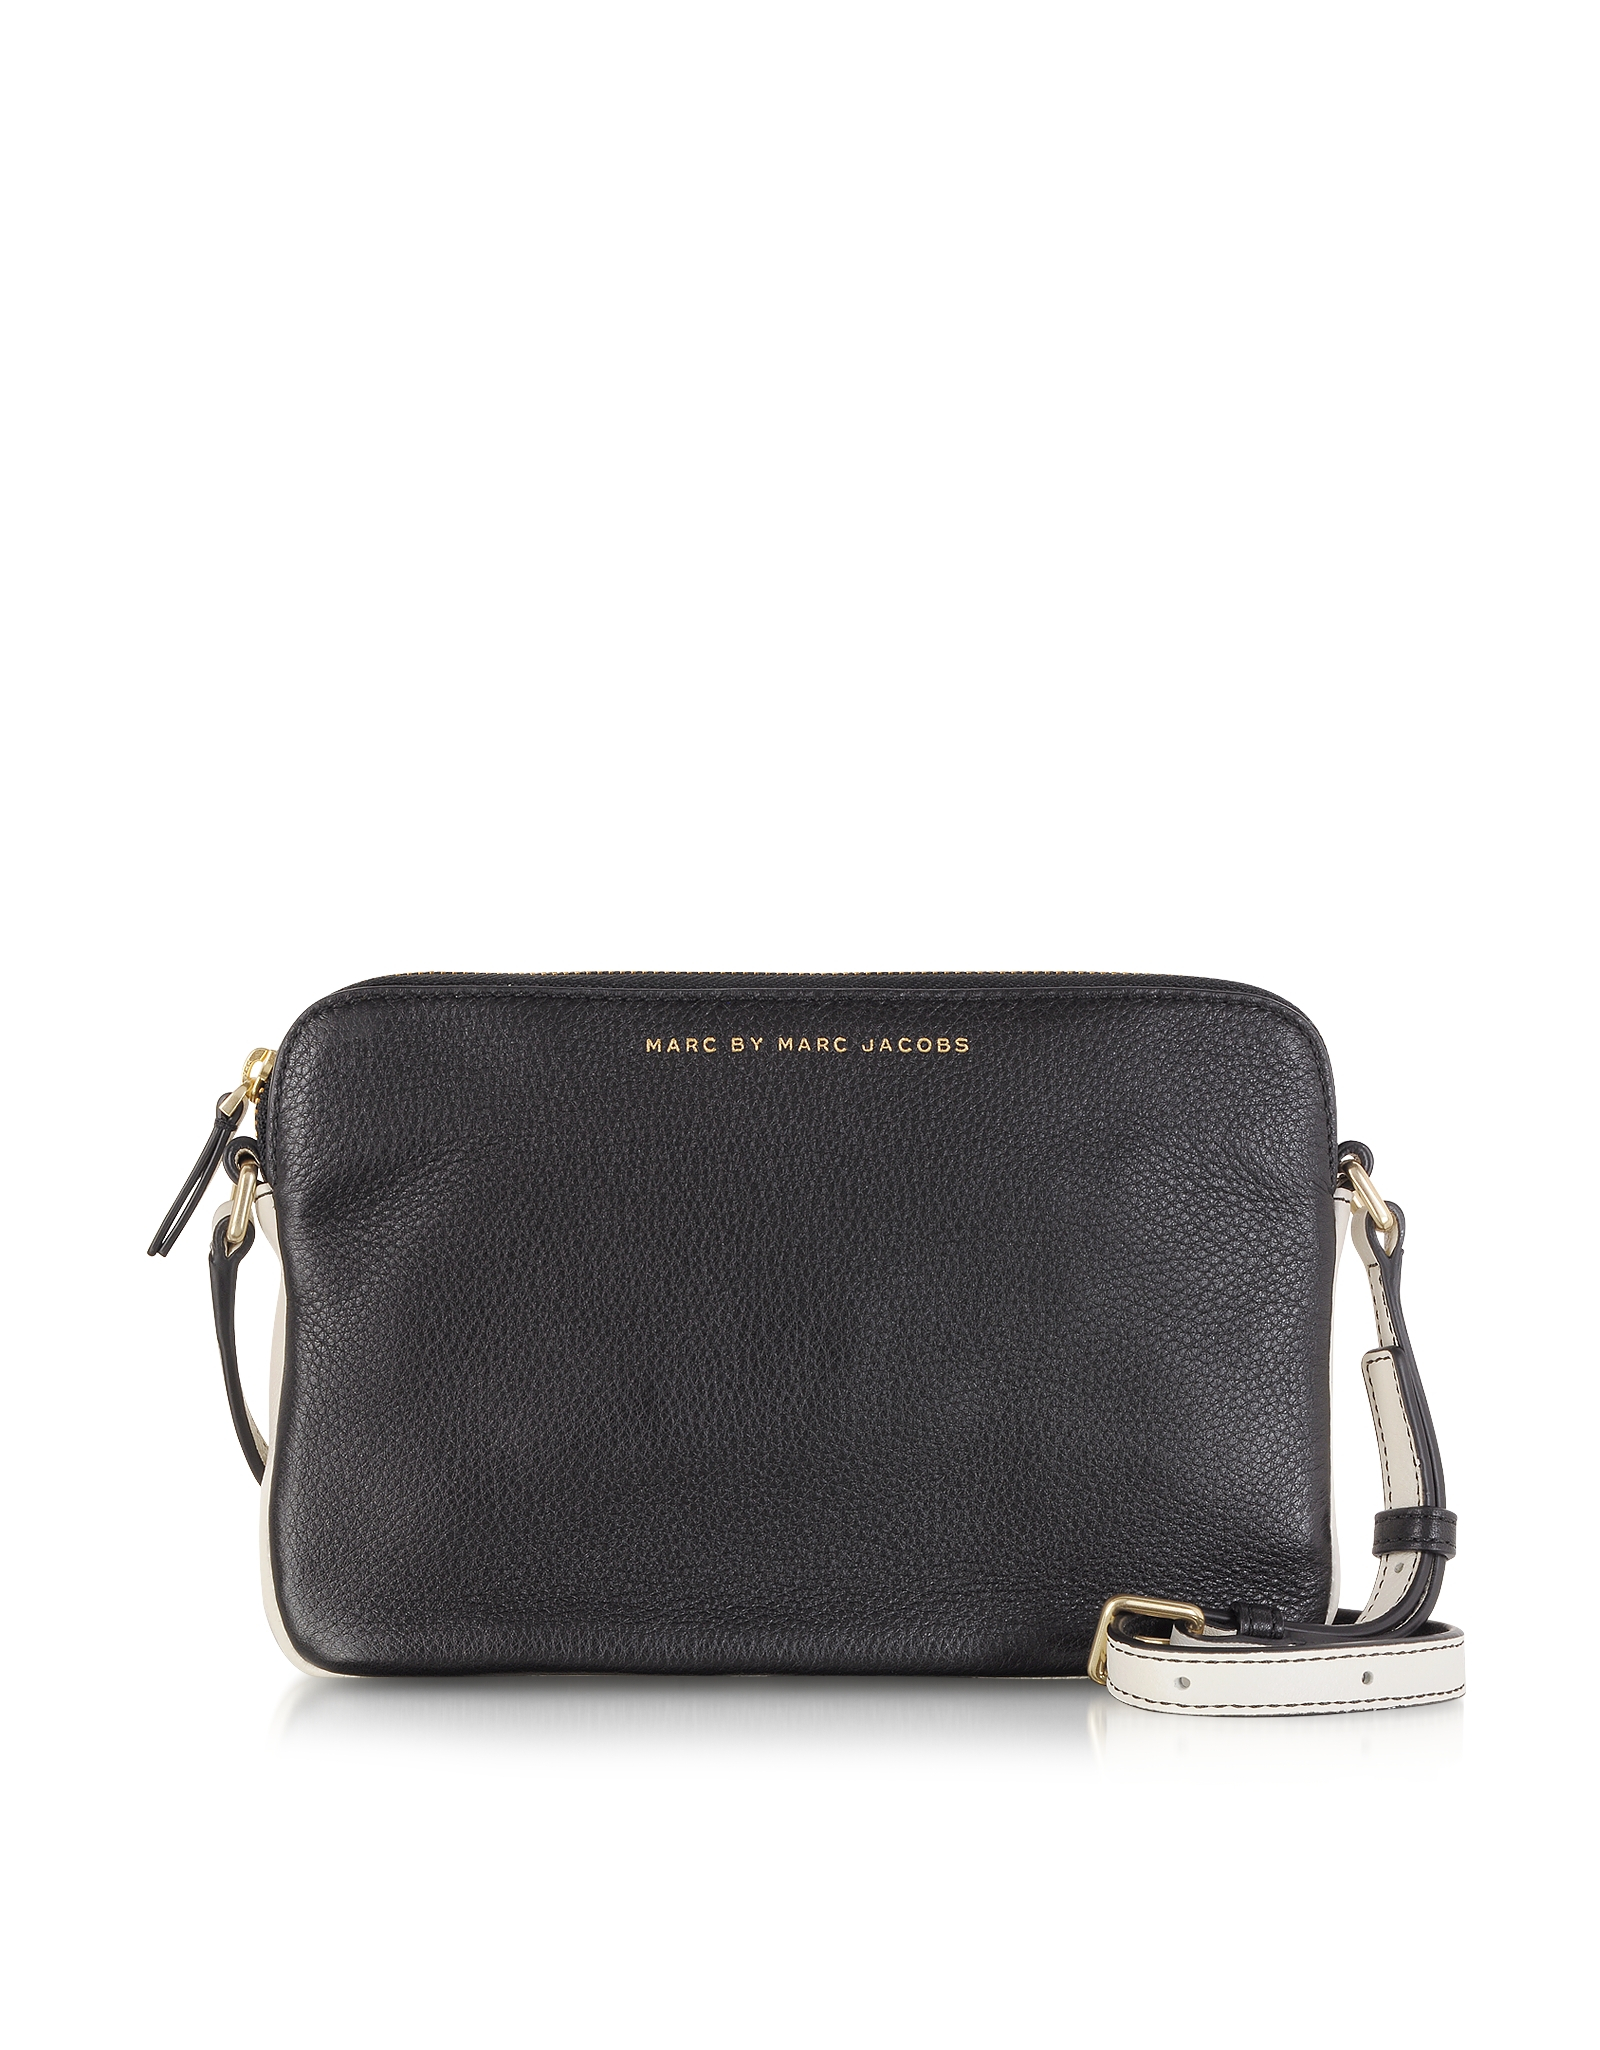 Lyst - Marc By Marc Jacobs Sophisticato Dani Leather Crossbody Bag in Black